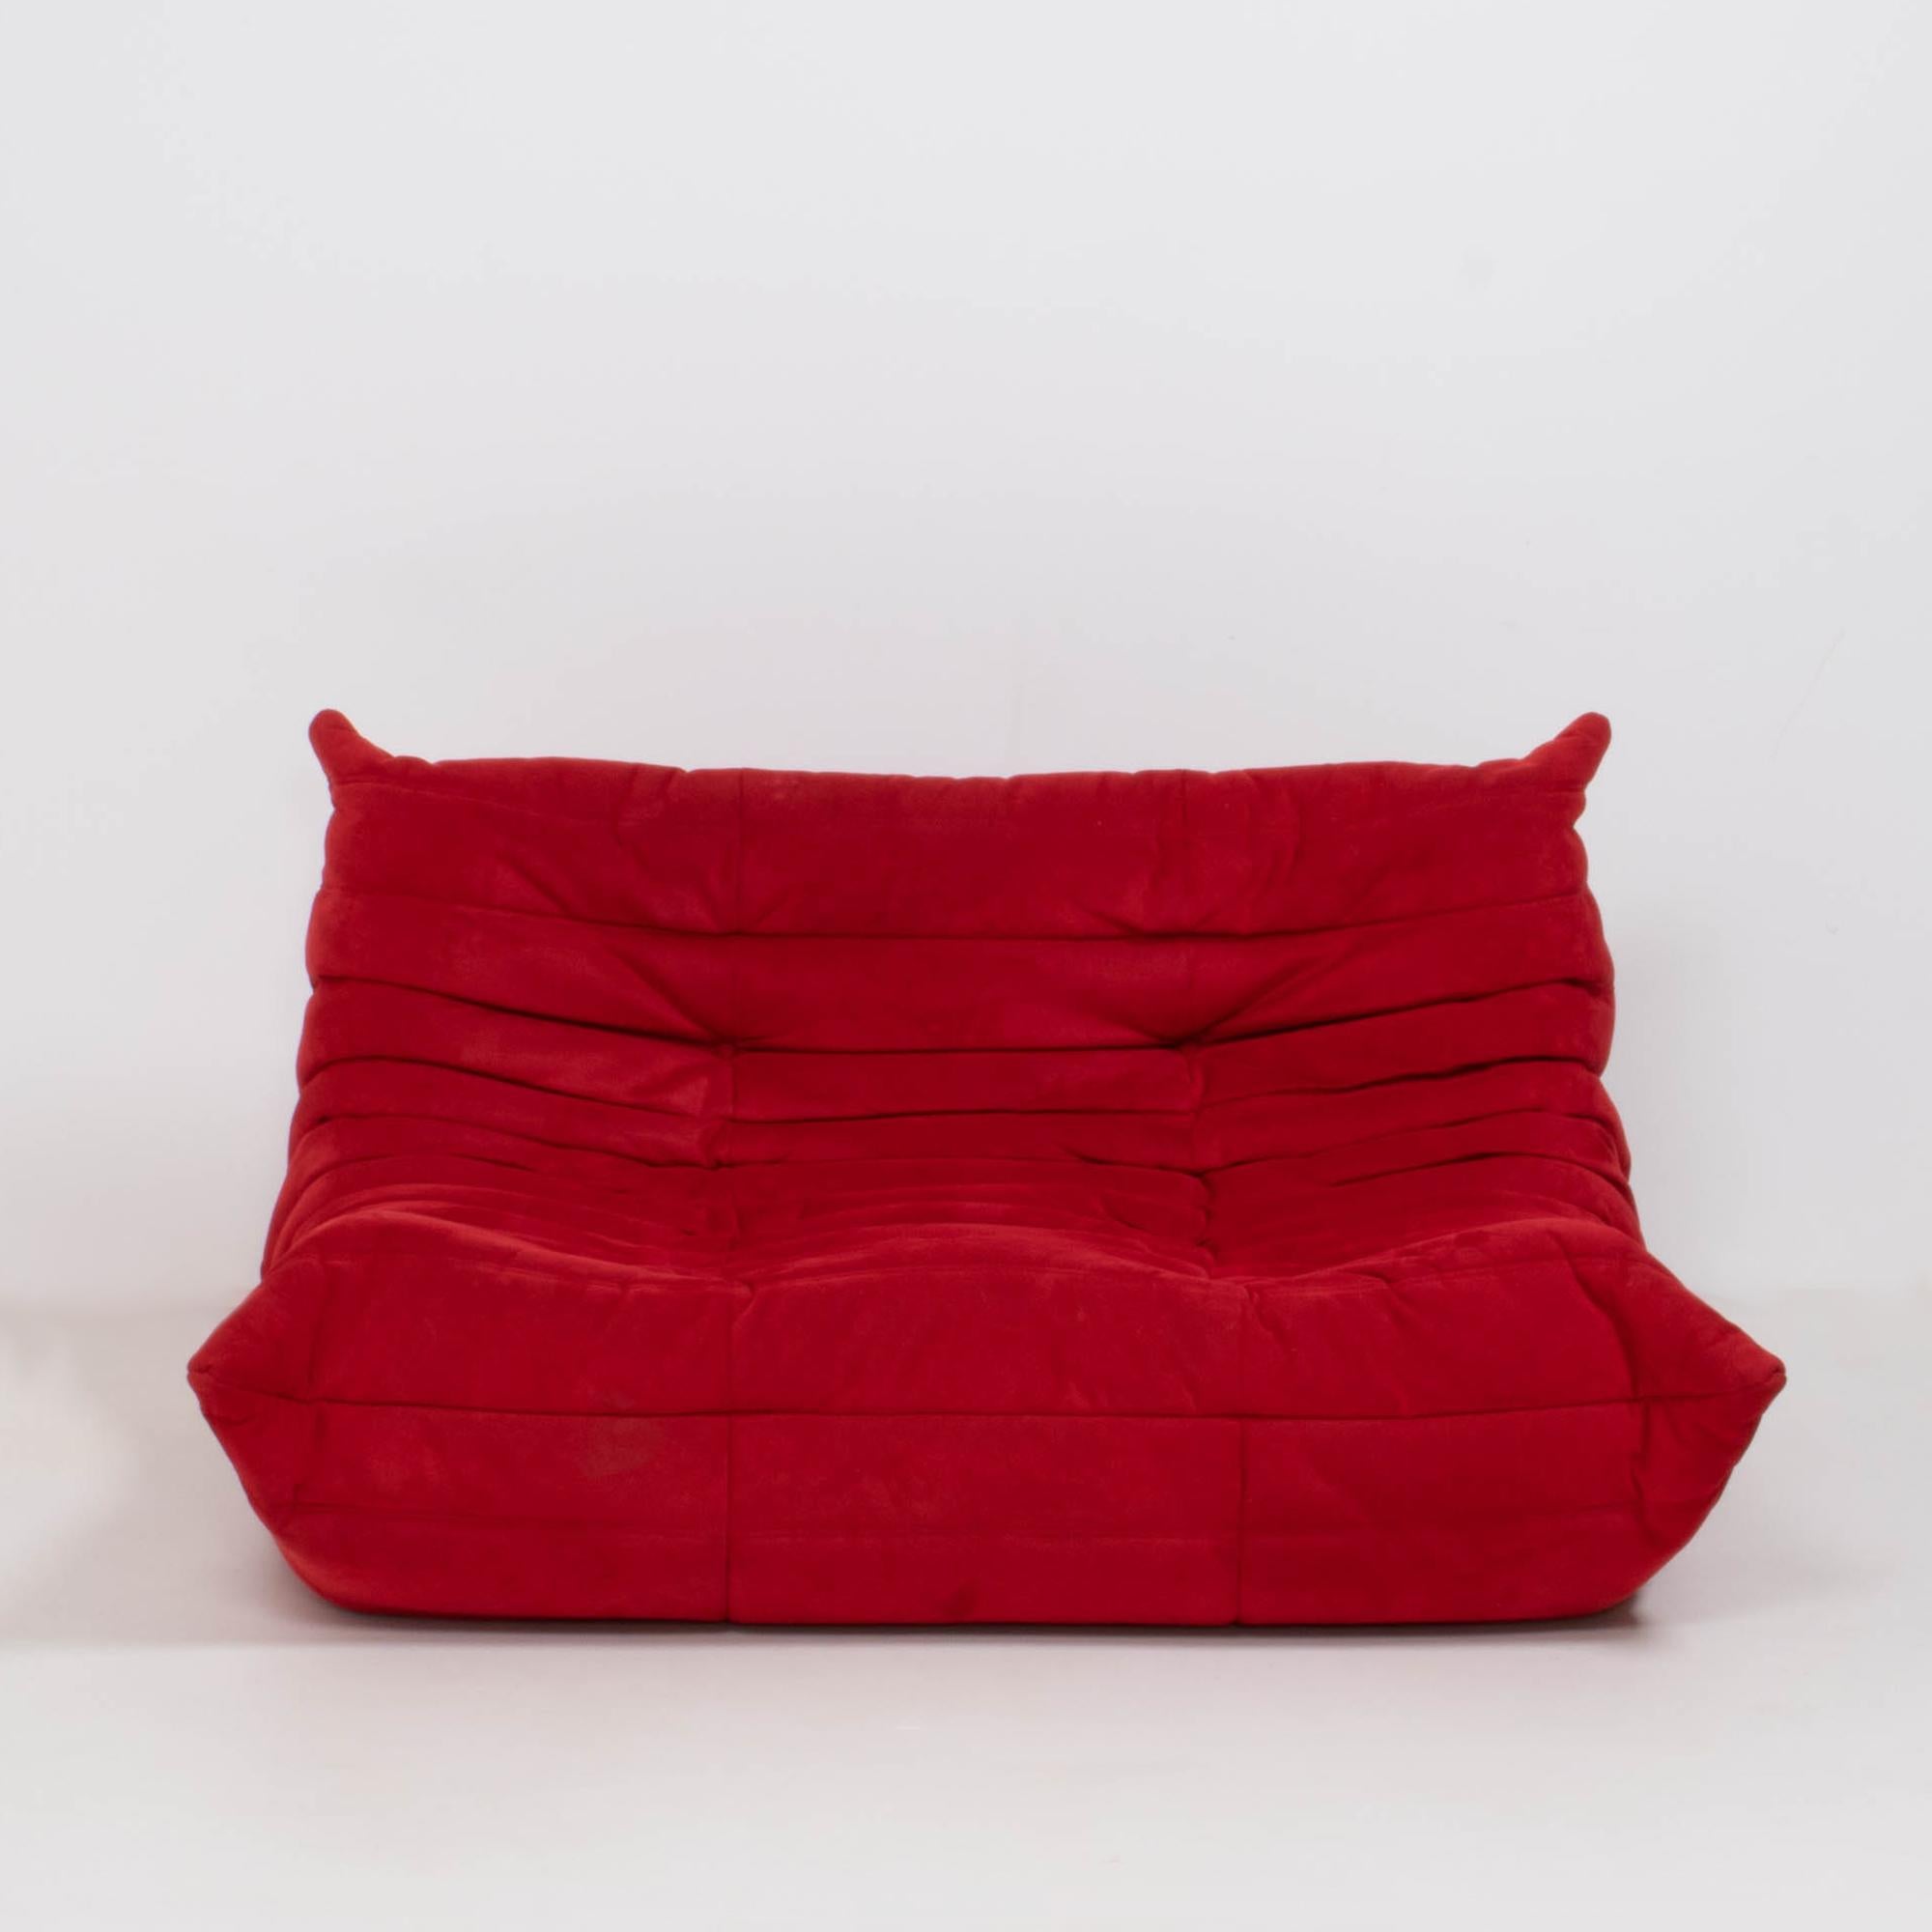 French Ligne Roset by Michel Ducaroy Togo Red Modular Sofas and Footstool, Set of 3